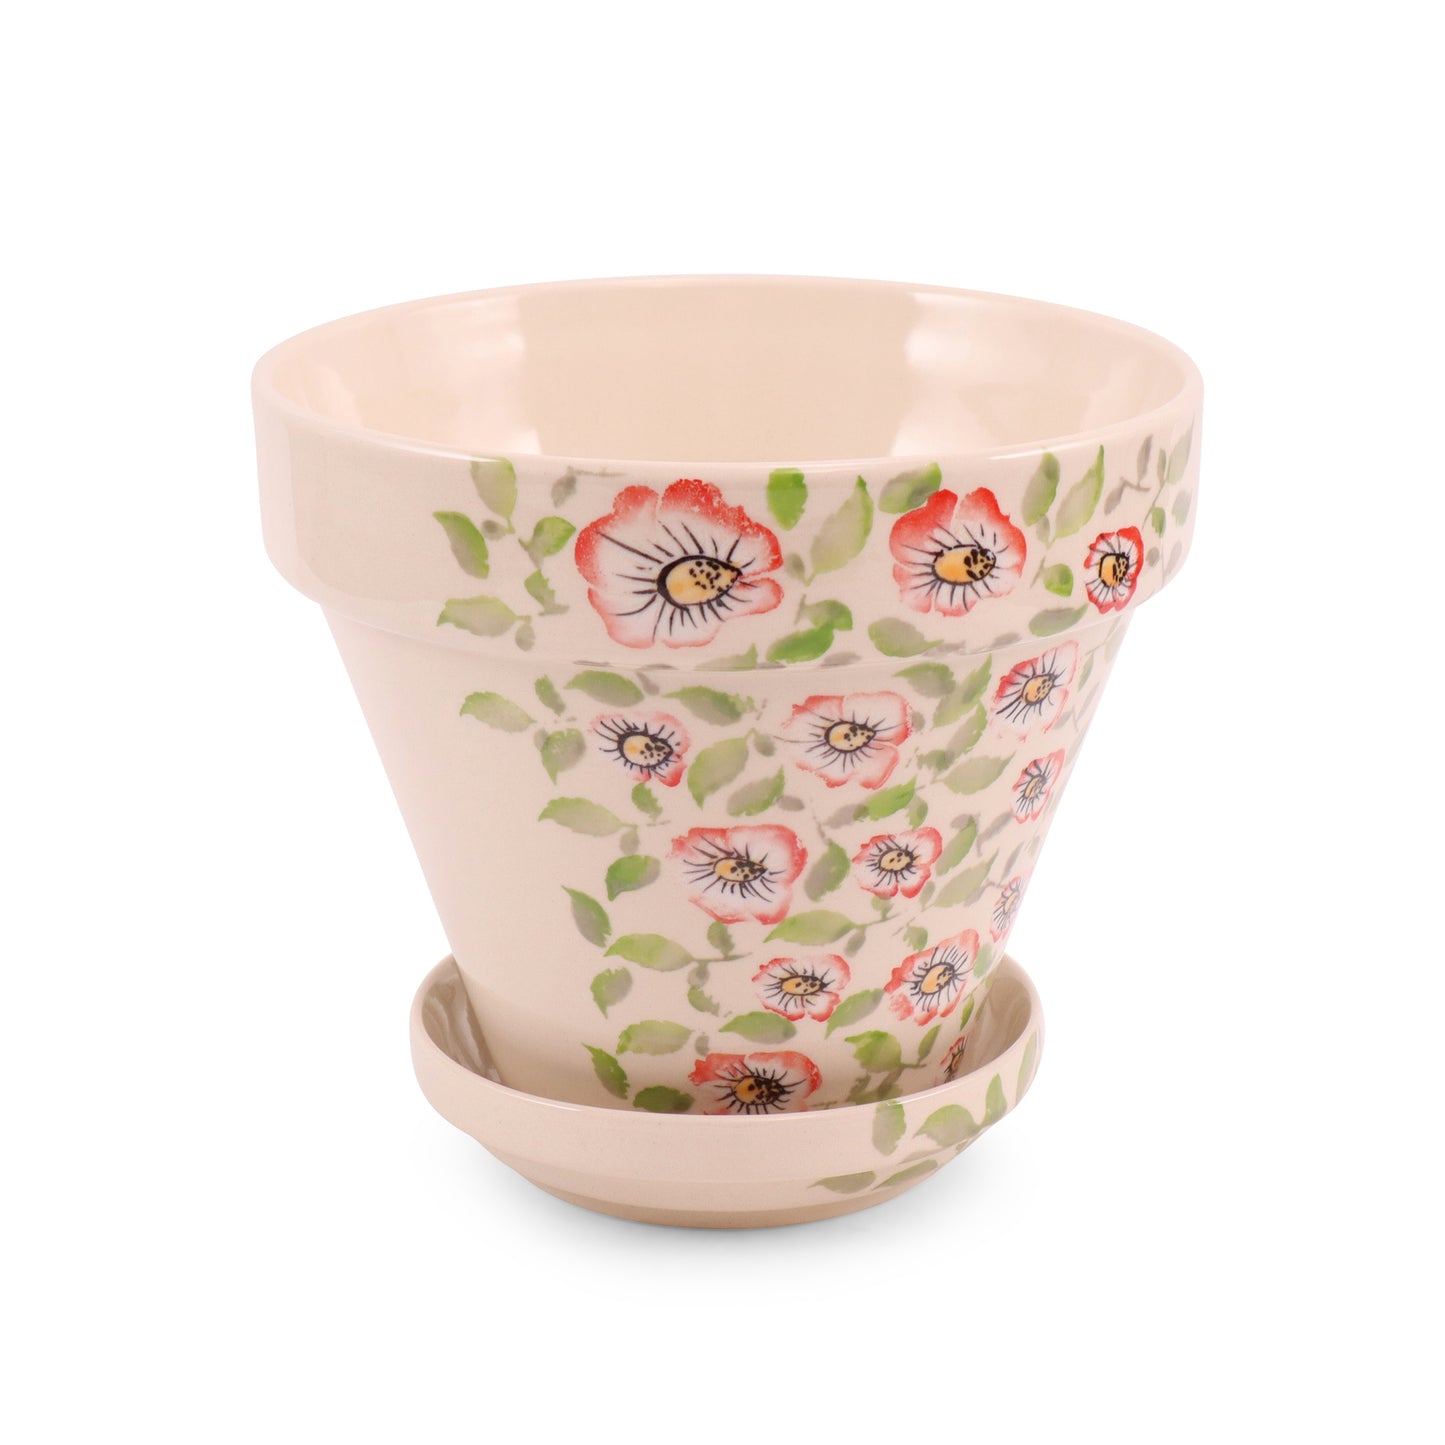 7.5"x6.5" Flower Pot with Tray. Pattern: Summer Vines